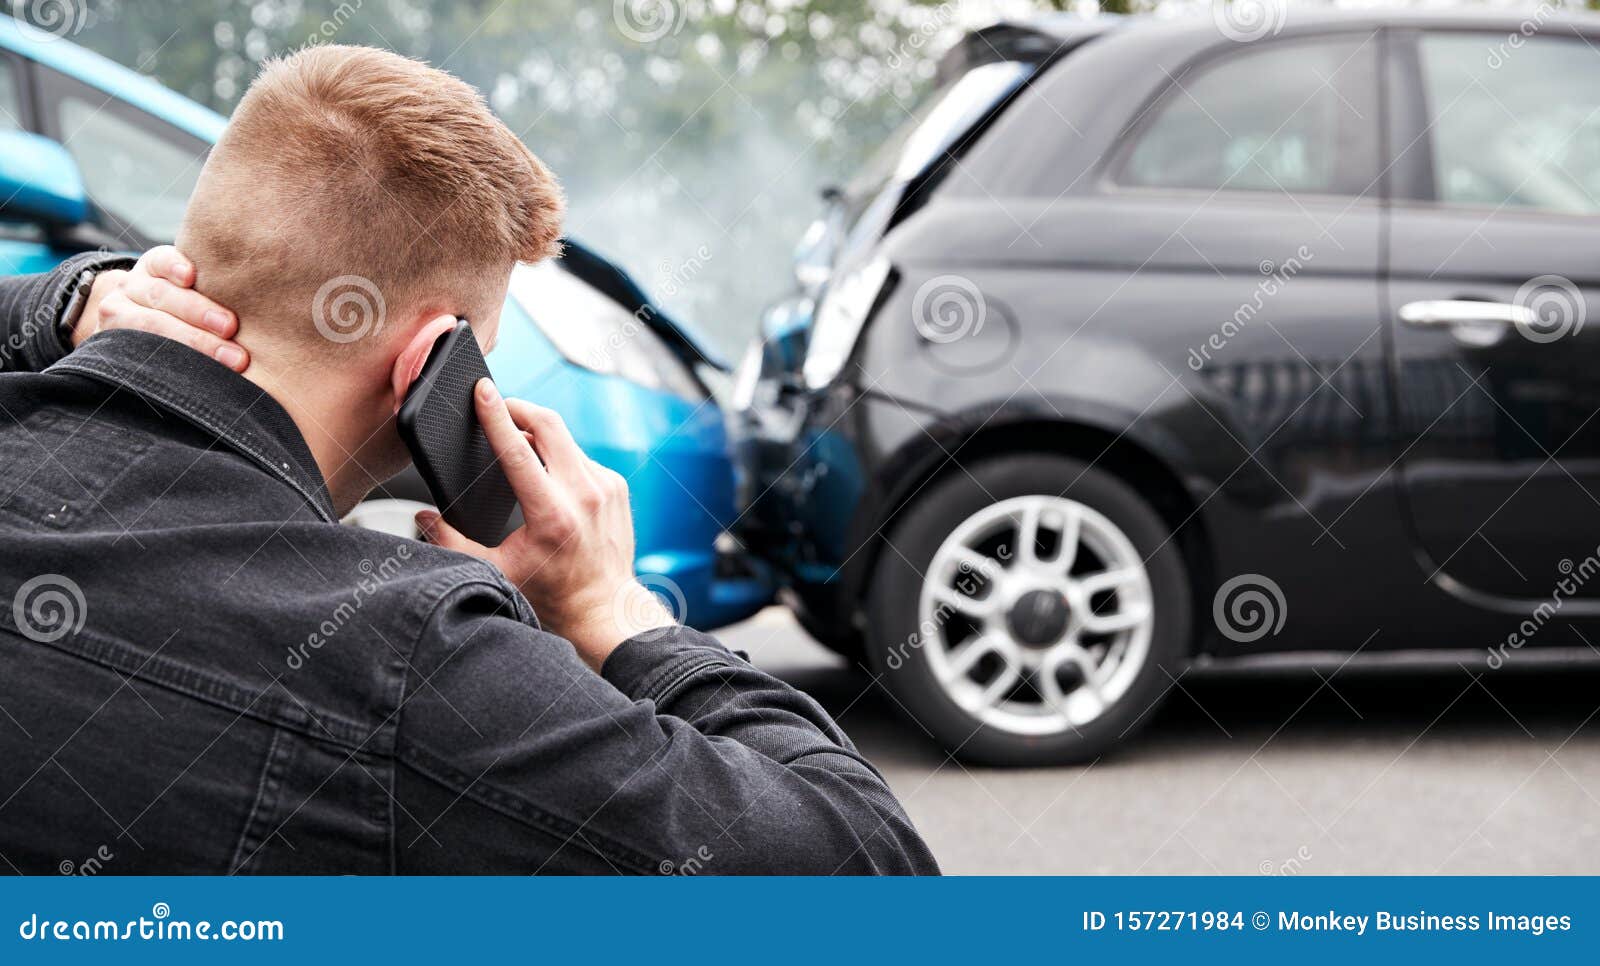 young male motorist involved in car accident calling insurance company or recovery service